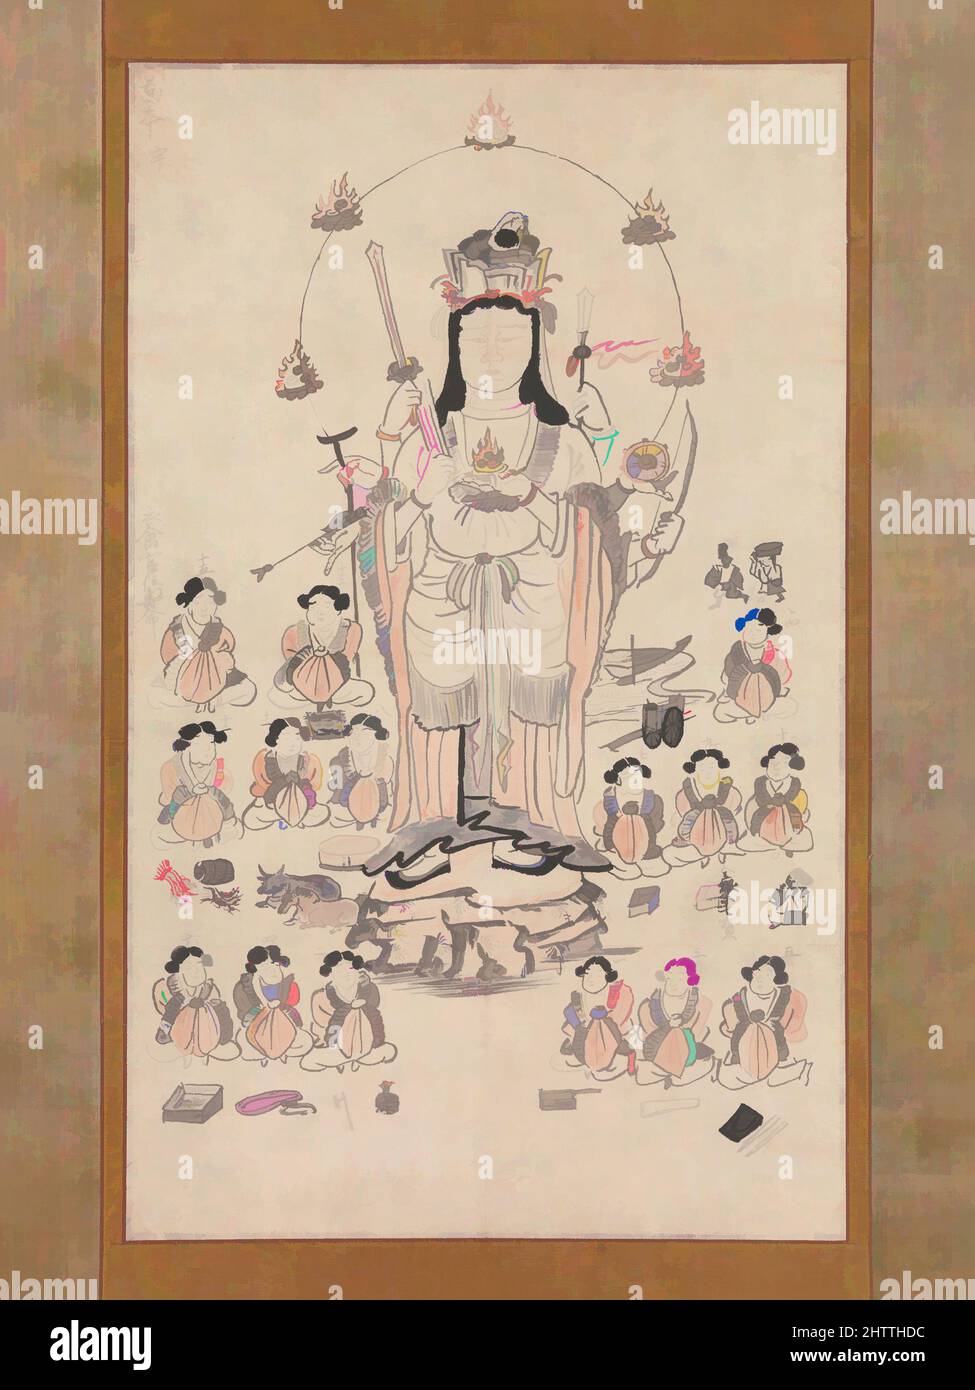 Art inspired by Benzaiten and Fifteen Attendants, 弁財天十五童子像, Kamakura period (1185–1333), 13th century, Japan, Hanging scroll; ink and color on paper, Overall: 53 1/2 x 19 3/8 in. (135.9 x 49.2 cm), Paintings, Classic works modernized by Artotop with a splash of modernity. Shapes, color and value, eye-catching visual impact on art. Emotions through freedom of artworks in a contemporary way. A timeless message pursuing a wildly creative new direction. Artists turning to the digital medium and creating the Artotop NFT Stock Photo